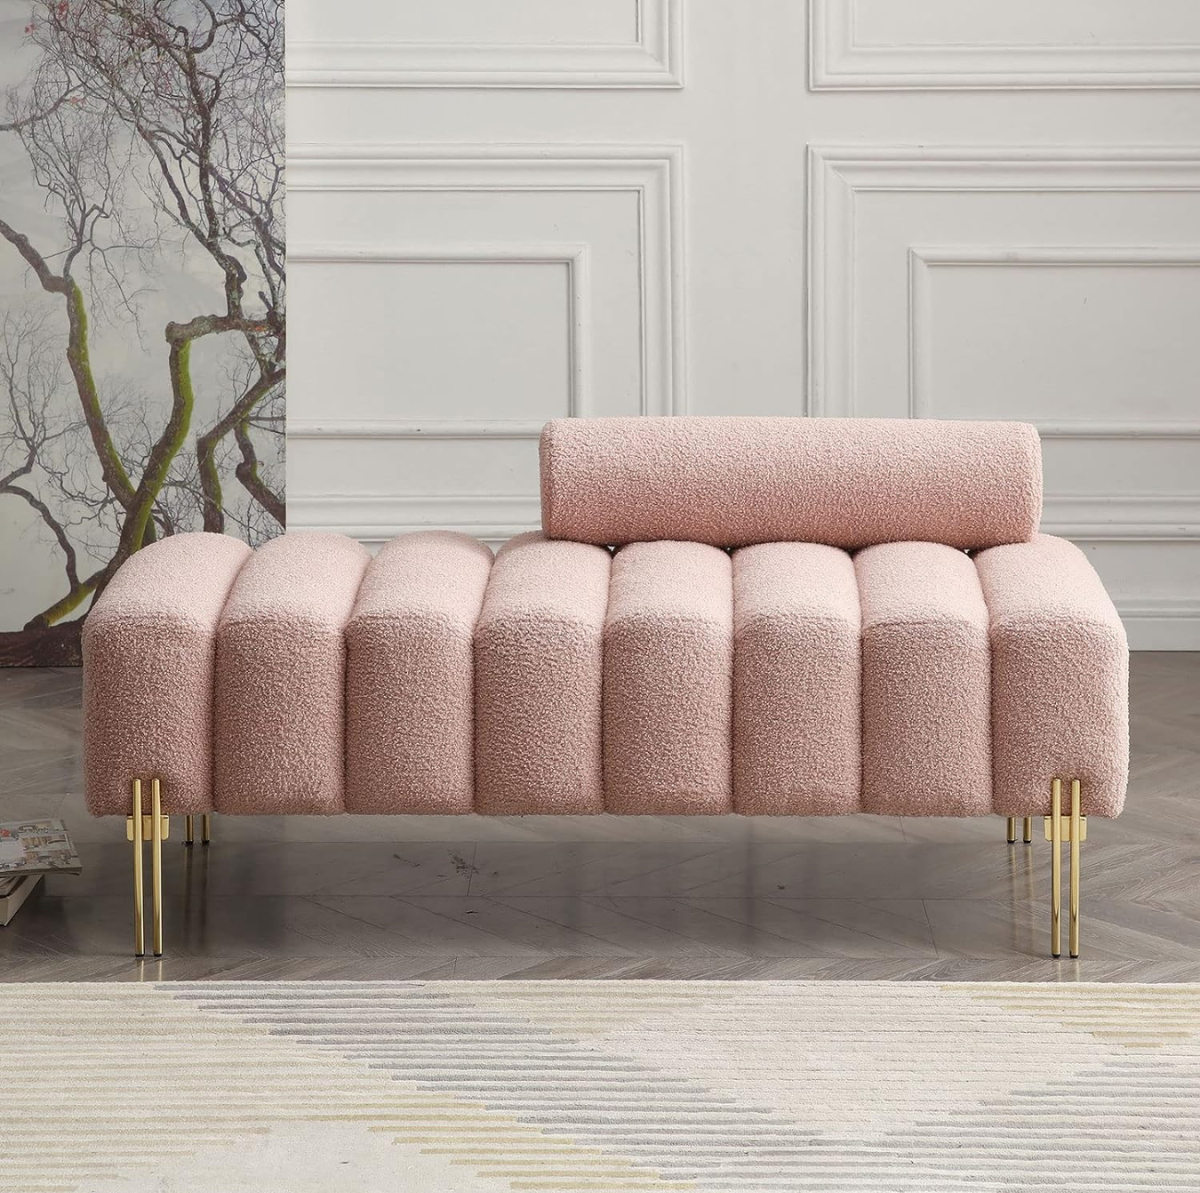 Sherpa Bedroom Bench, Channel Tufted Ottoman End of Bed Bench, Modern Upholstered Entryway Bench, Boucle Accent Bench Seat with Adjustable Back for Living Room, Hallway, Foyer(Pink)